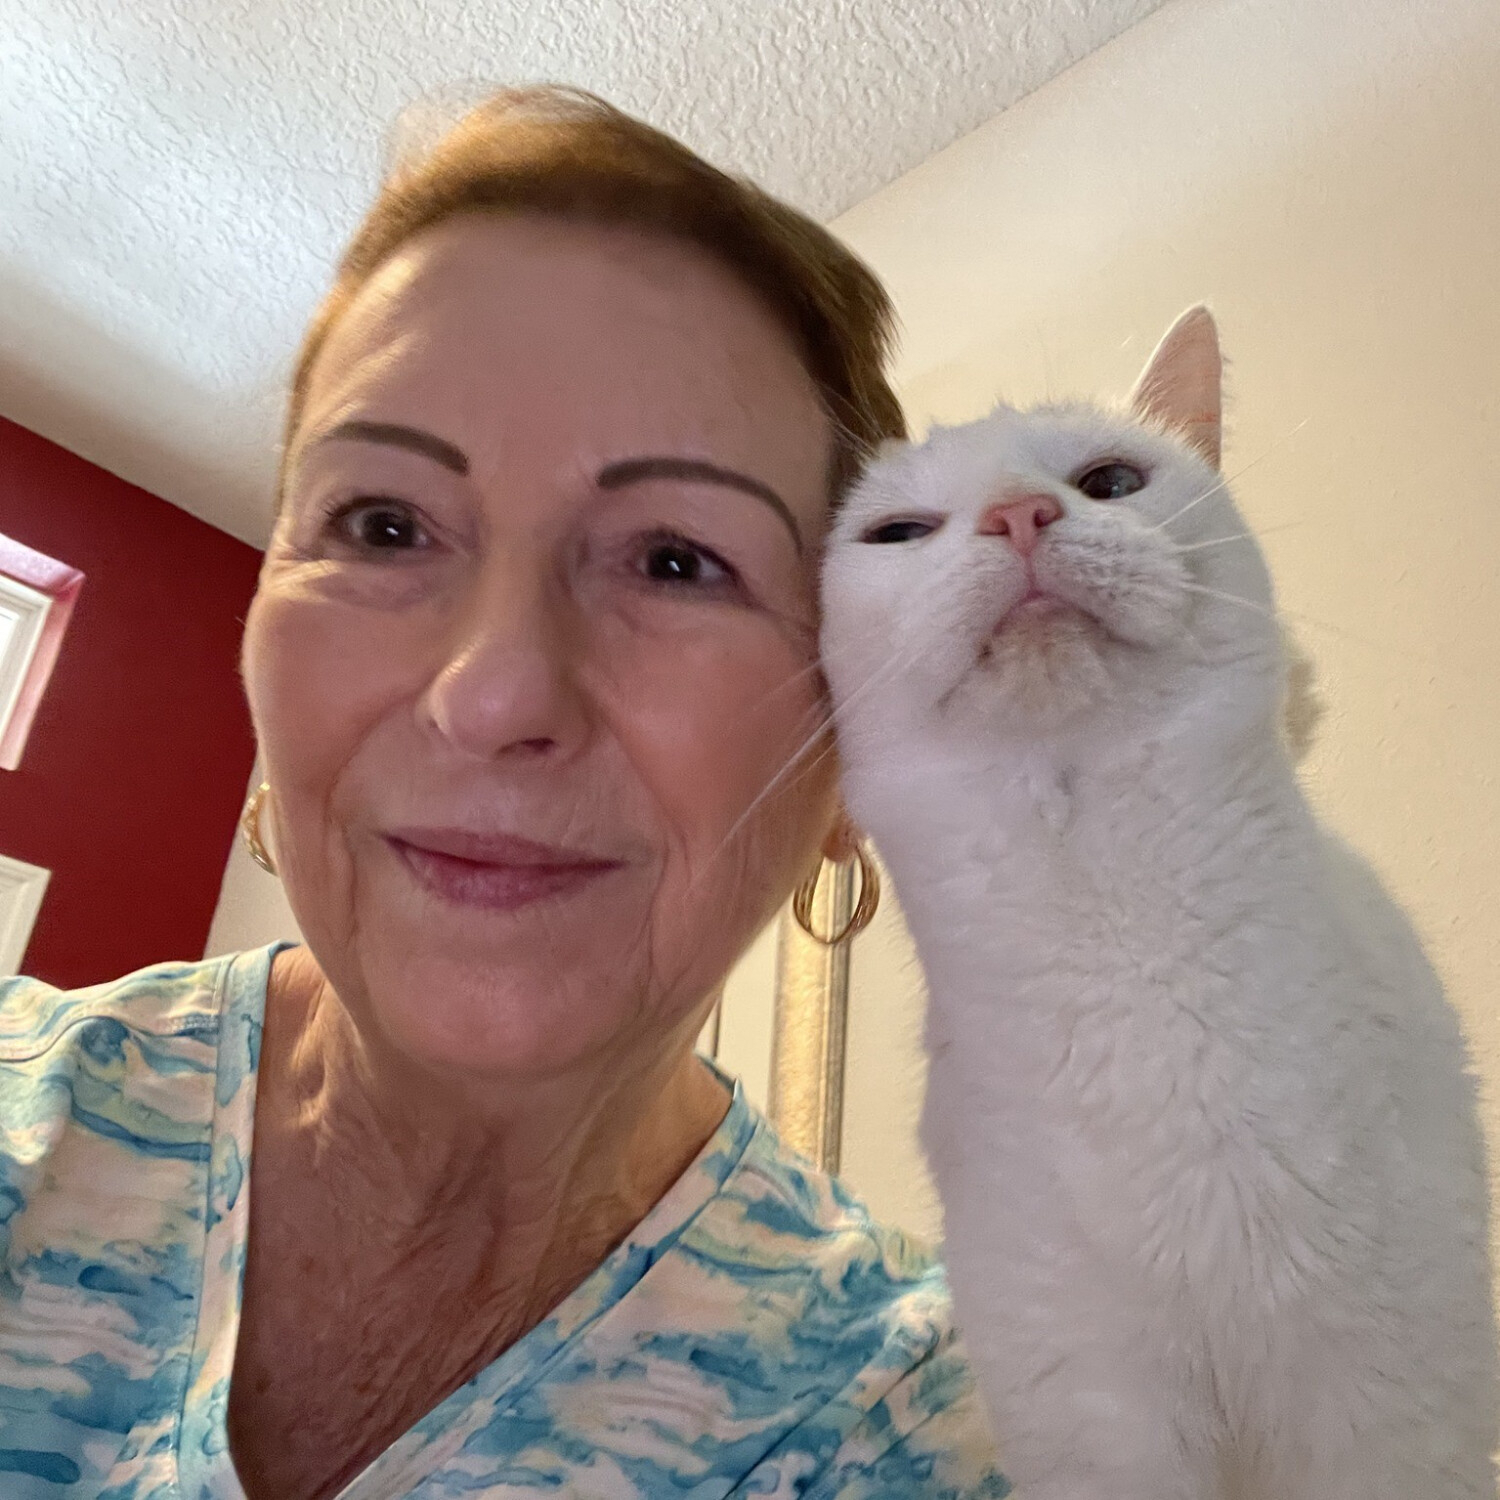 Why We Need More Professional Pet Sitters – Pet Sitter Series - Mary Oberdier